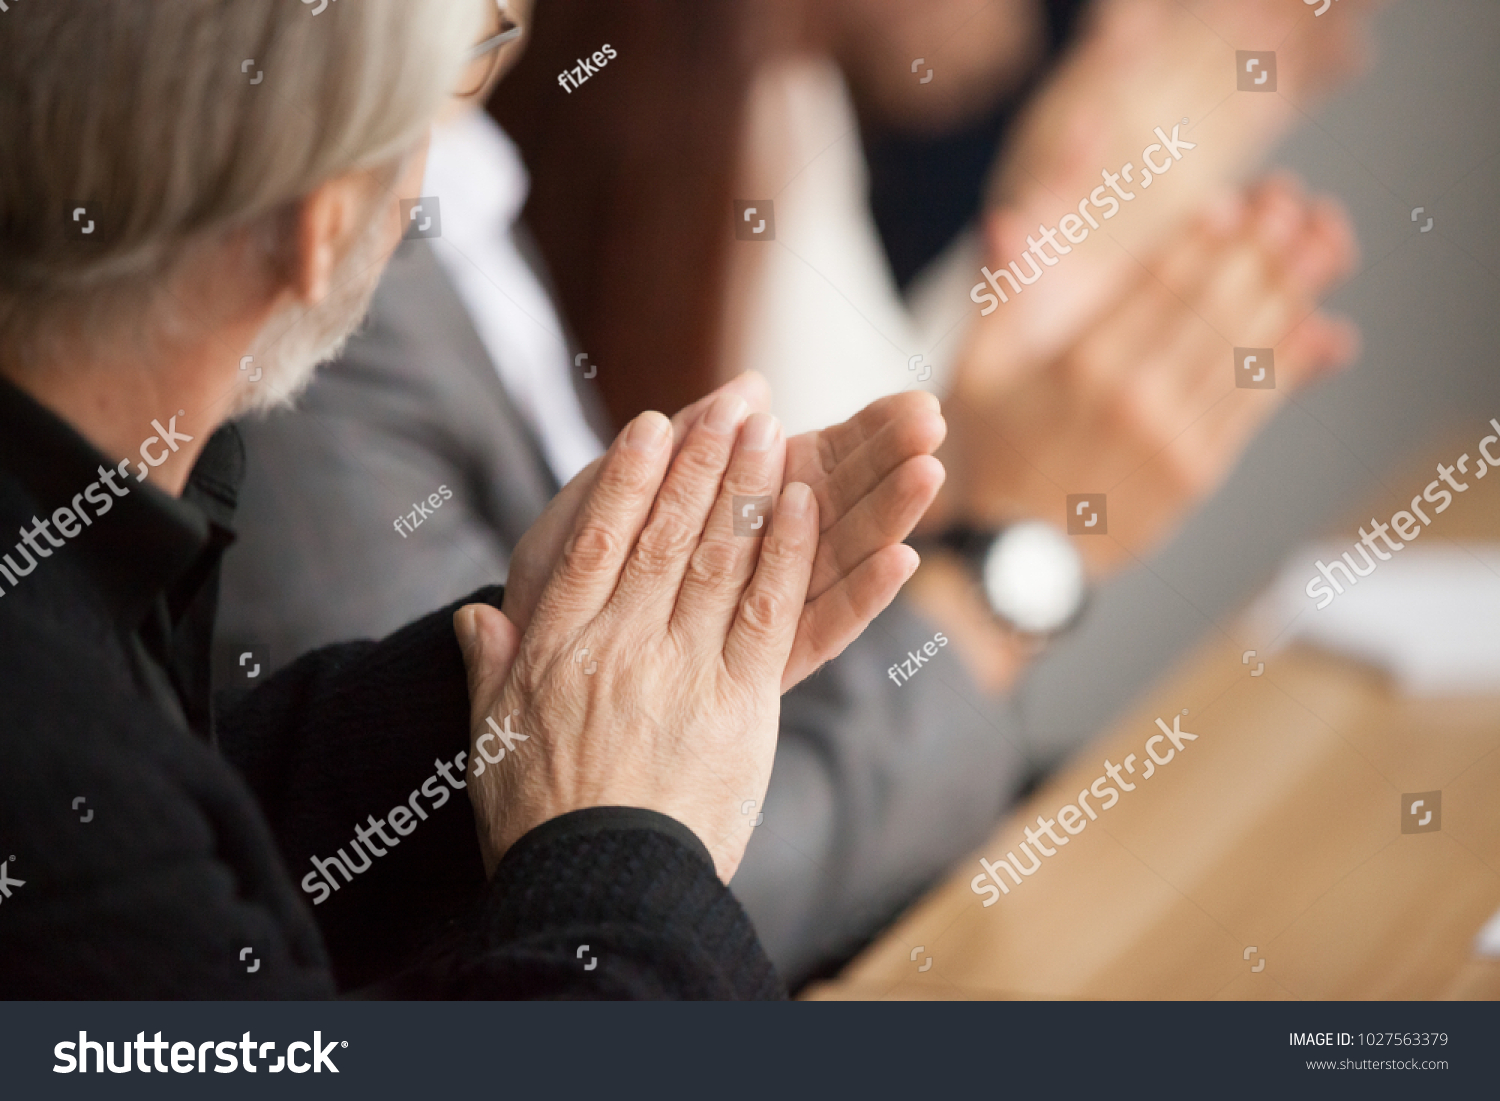 Senior gray-haired businessman clapping hands attending conference, aged training participant applauding at group meeting, old man expressing appreciation or congratulation, rear view, focus on hands #1027563379